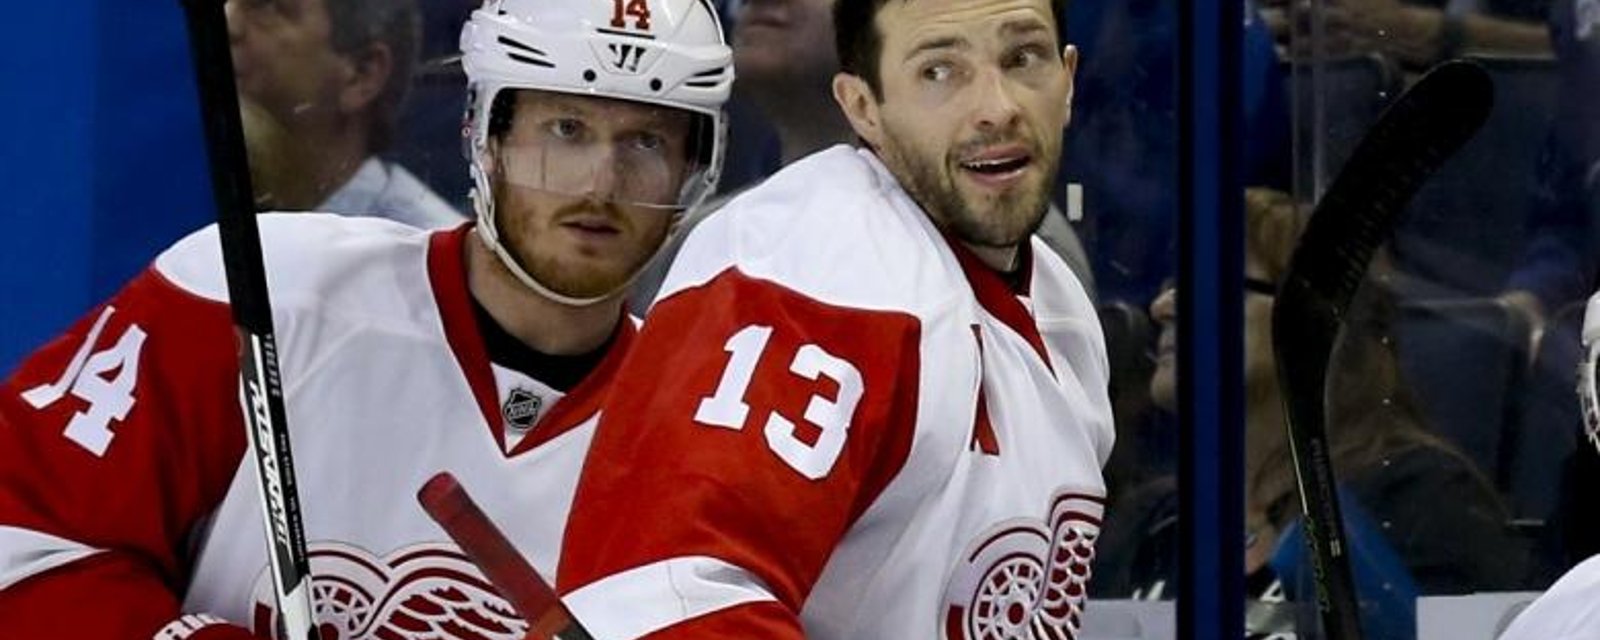 Breaking: Datsyuk's agent slams the breaks on reports out of Russia.